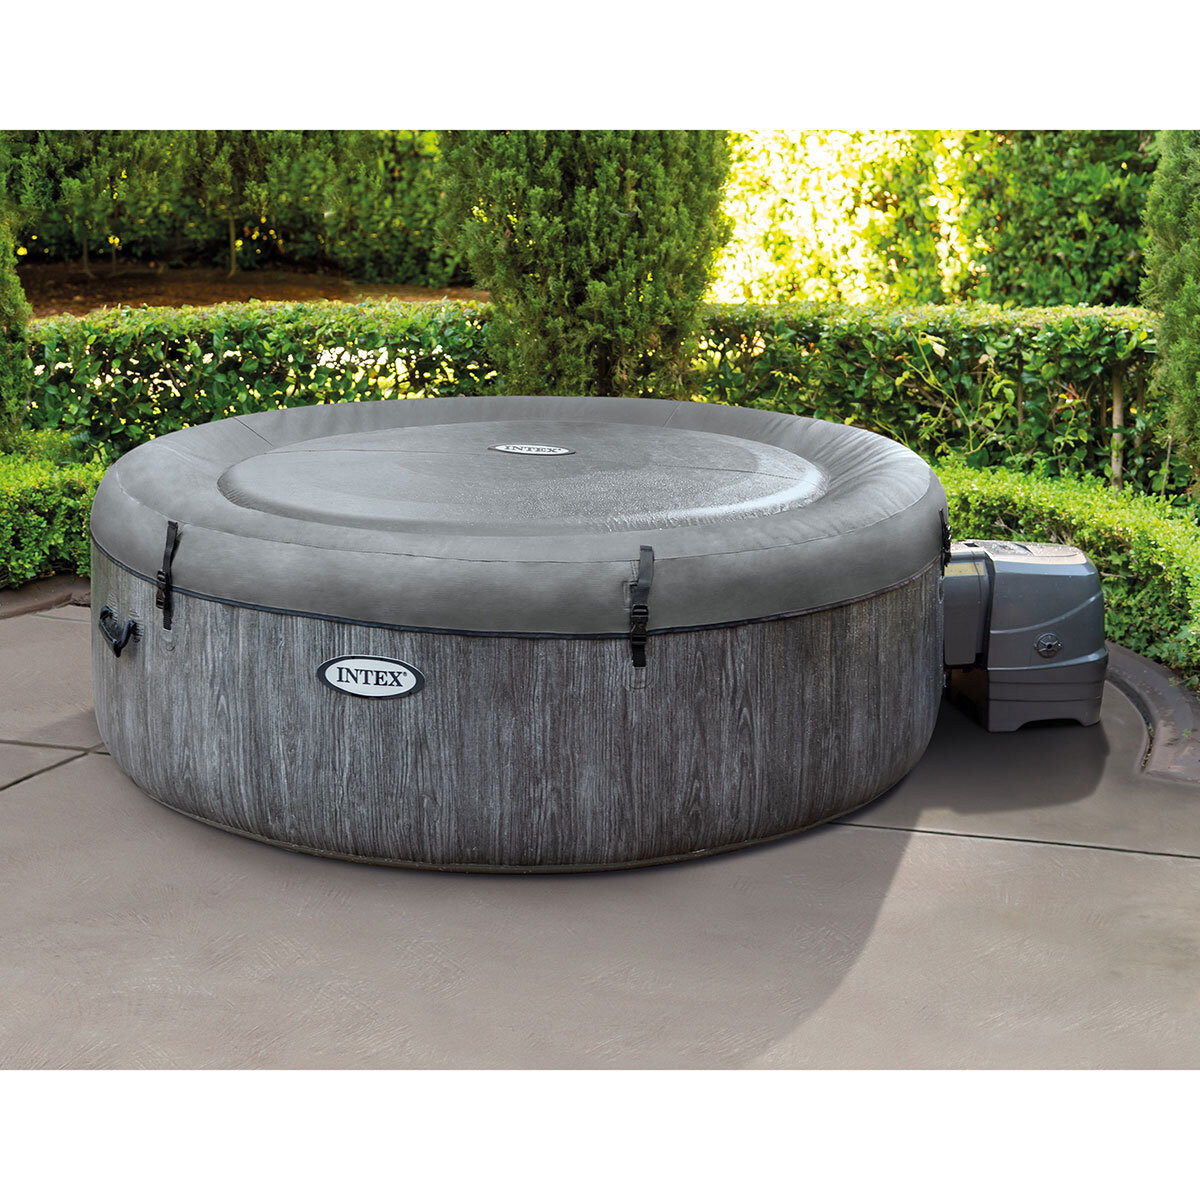 Intex PureSpa Greywood Deluxe 6 Person Inflatable Hot Tub